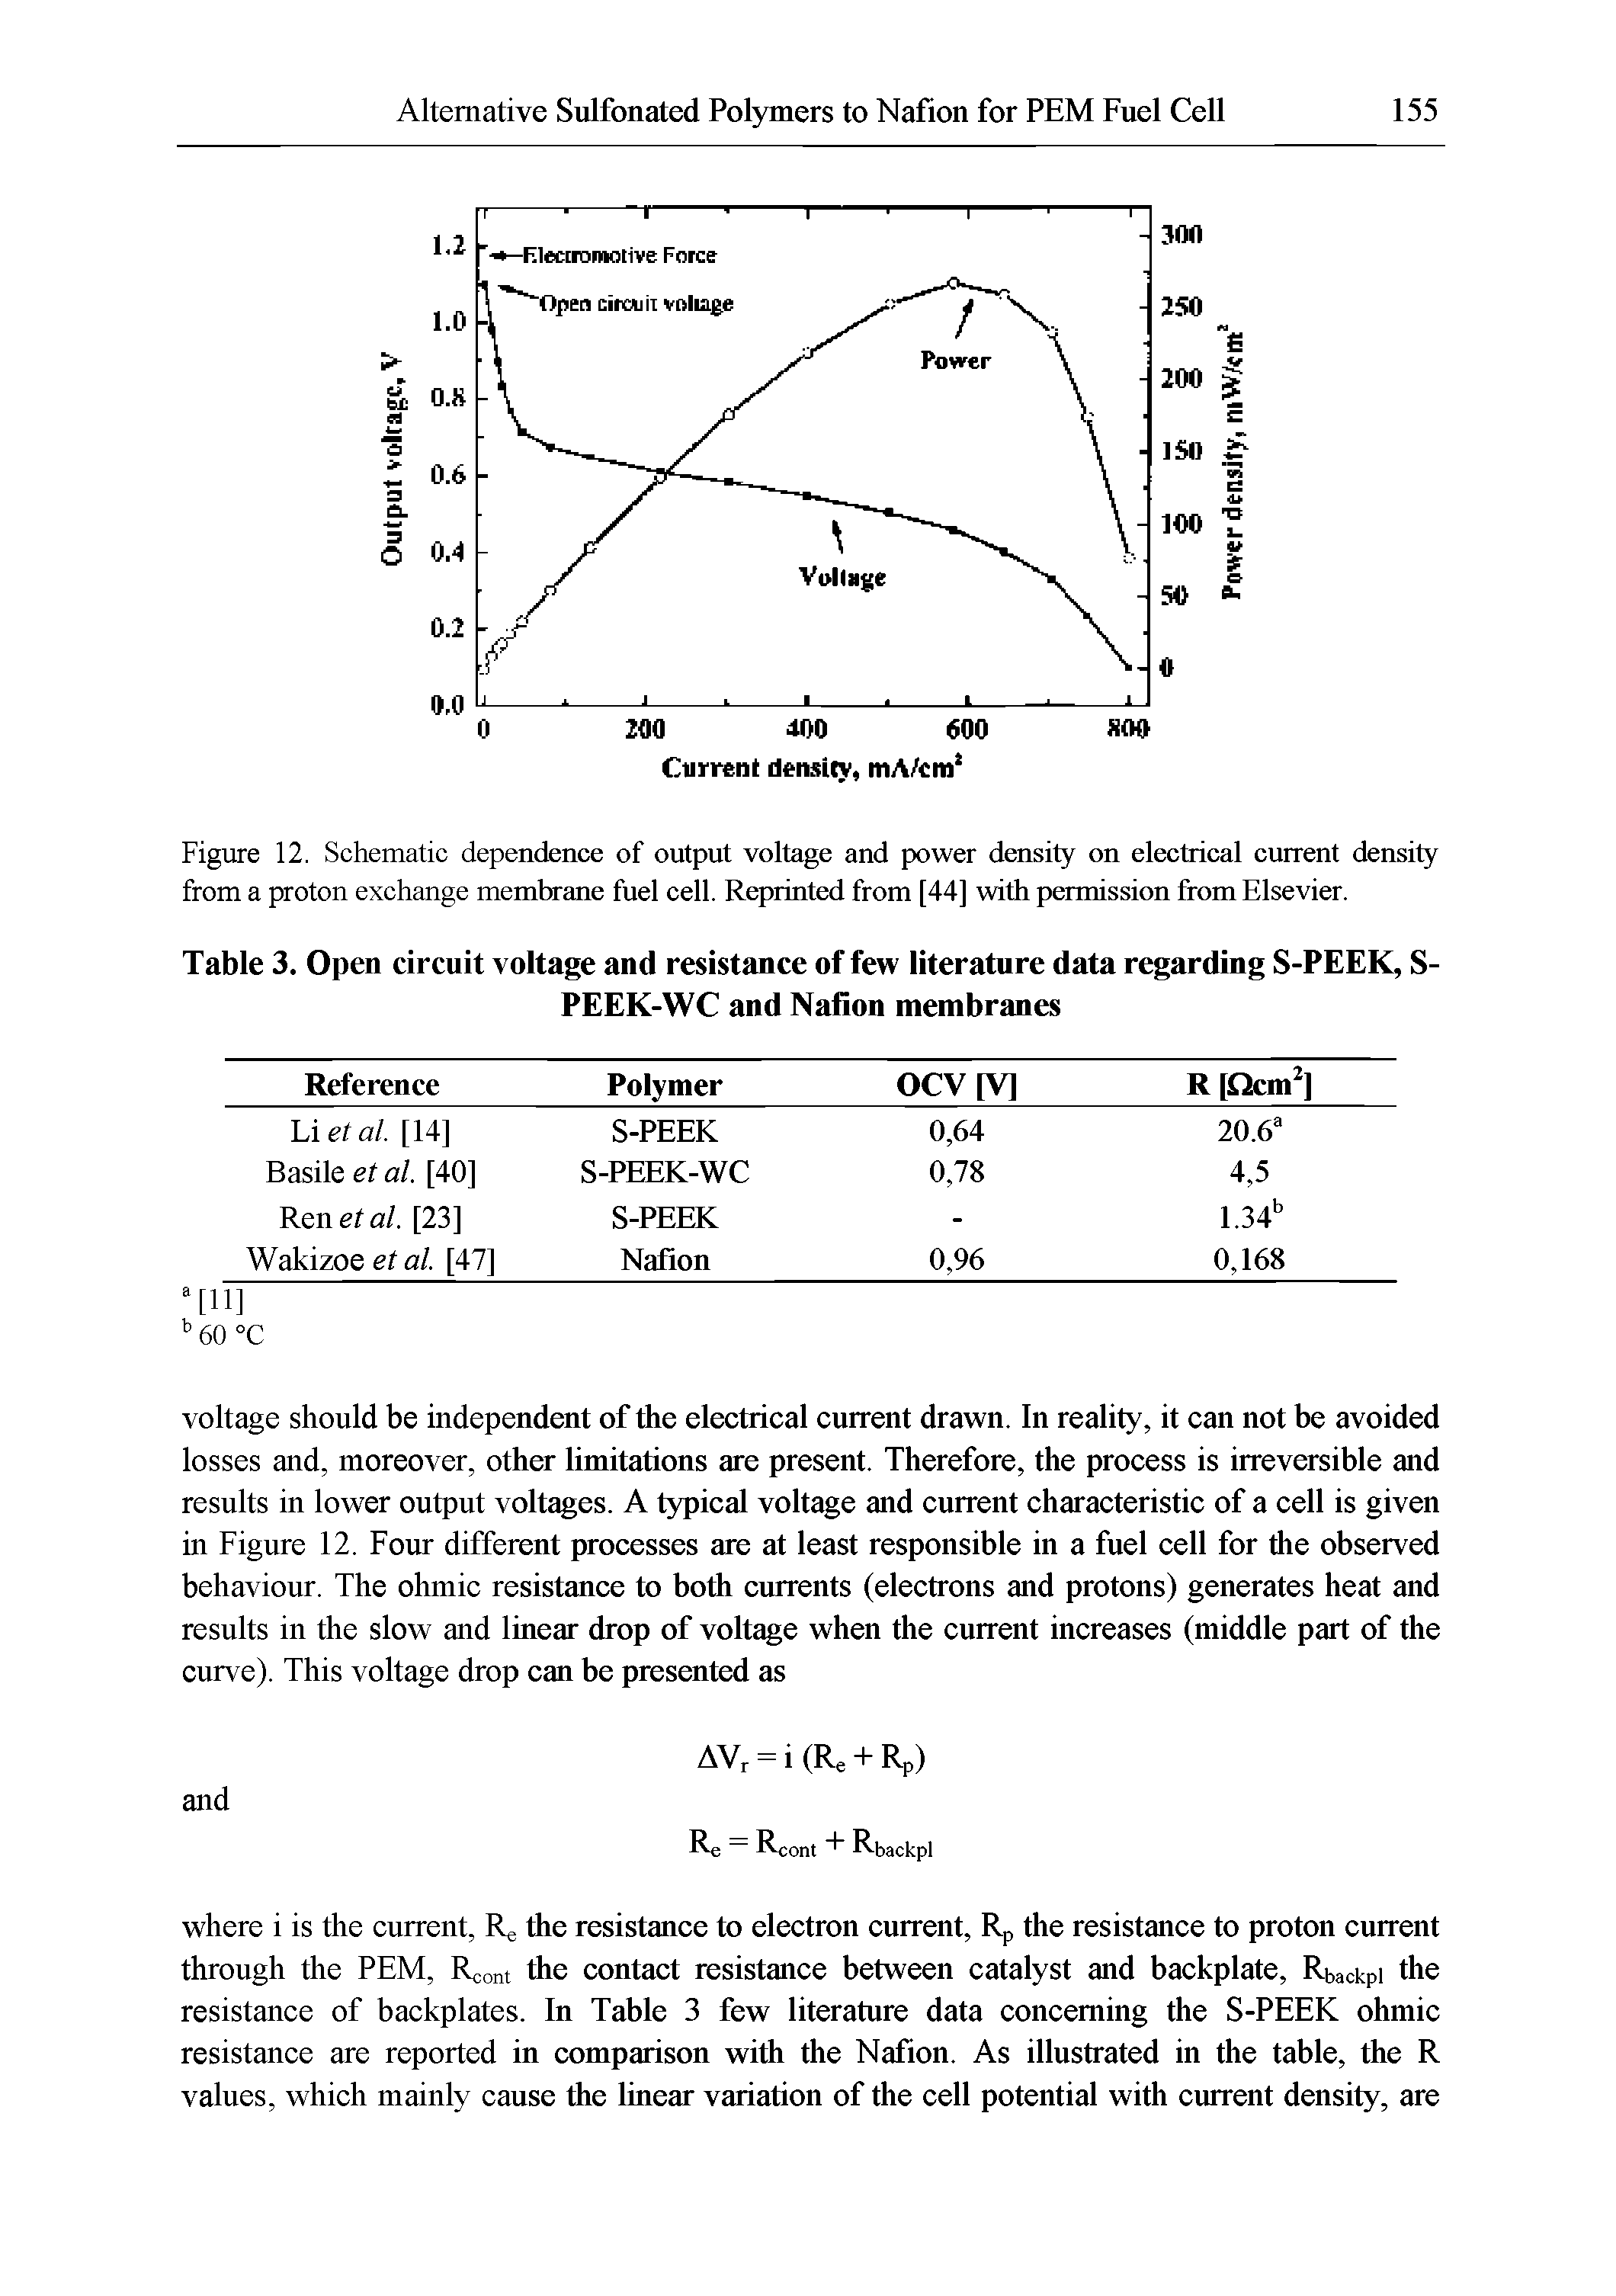 Figure 12. Schematic dependence of output voltage and power density on electrical current density from a proton exchange membrane fuel cell. Reprinted from [44] with permission from Elsevier.